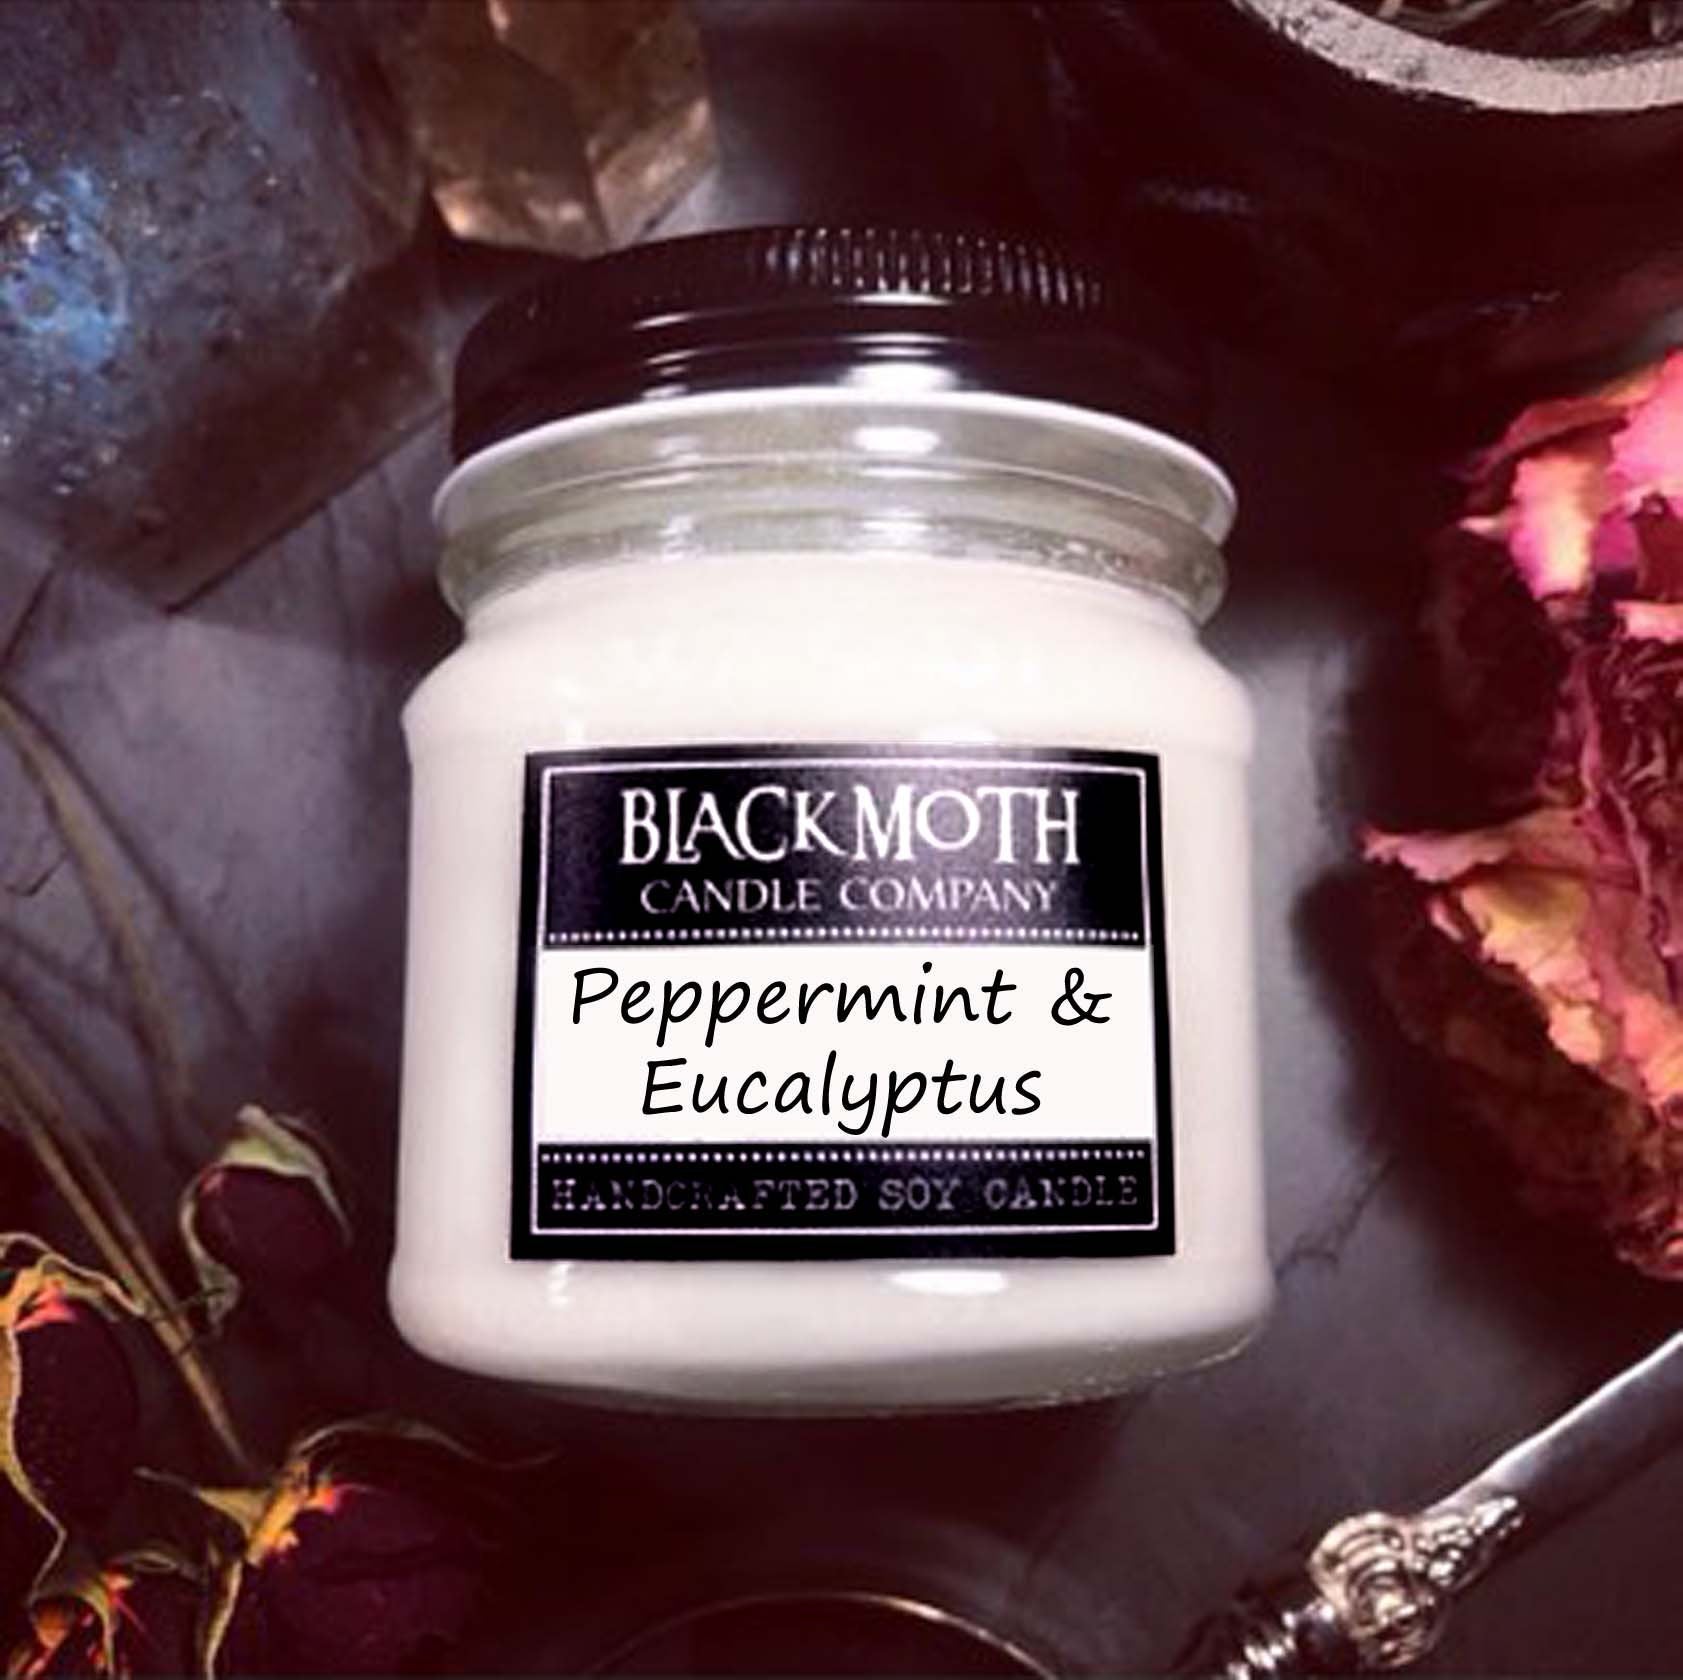 8 oz Peppermint & Eucalyptus Scented Soy Candle in Mason Jar